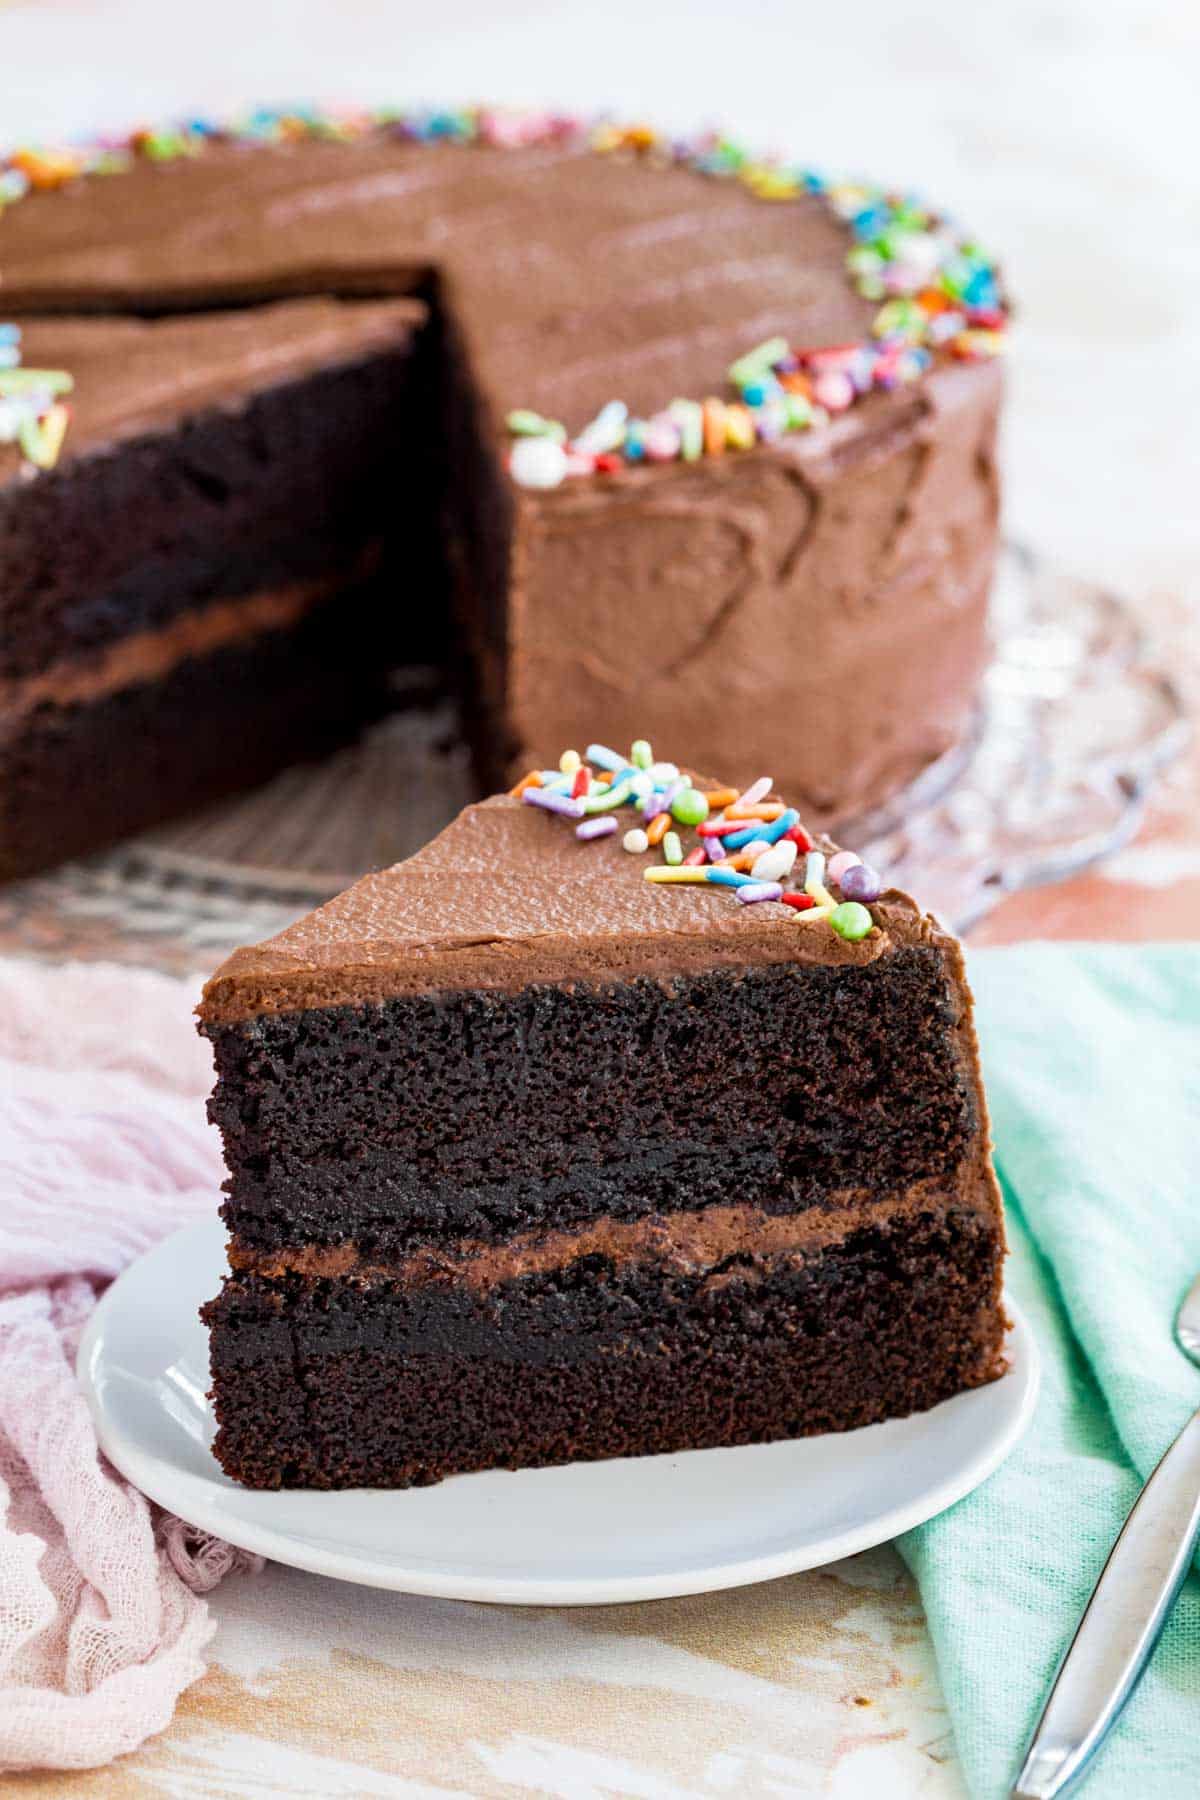 A slice of gluten-free chocolate layer cake on a plate next to the full cake.